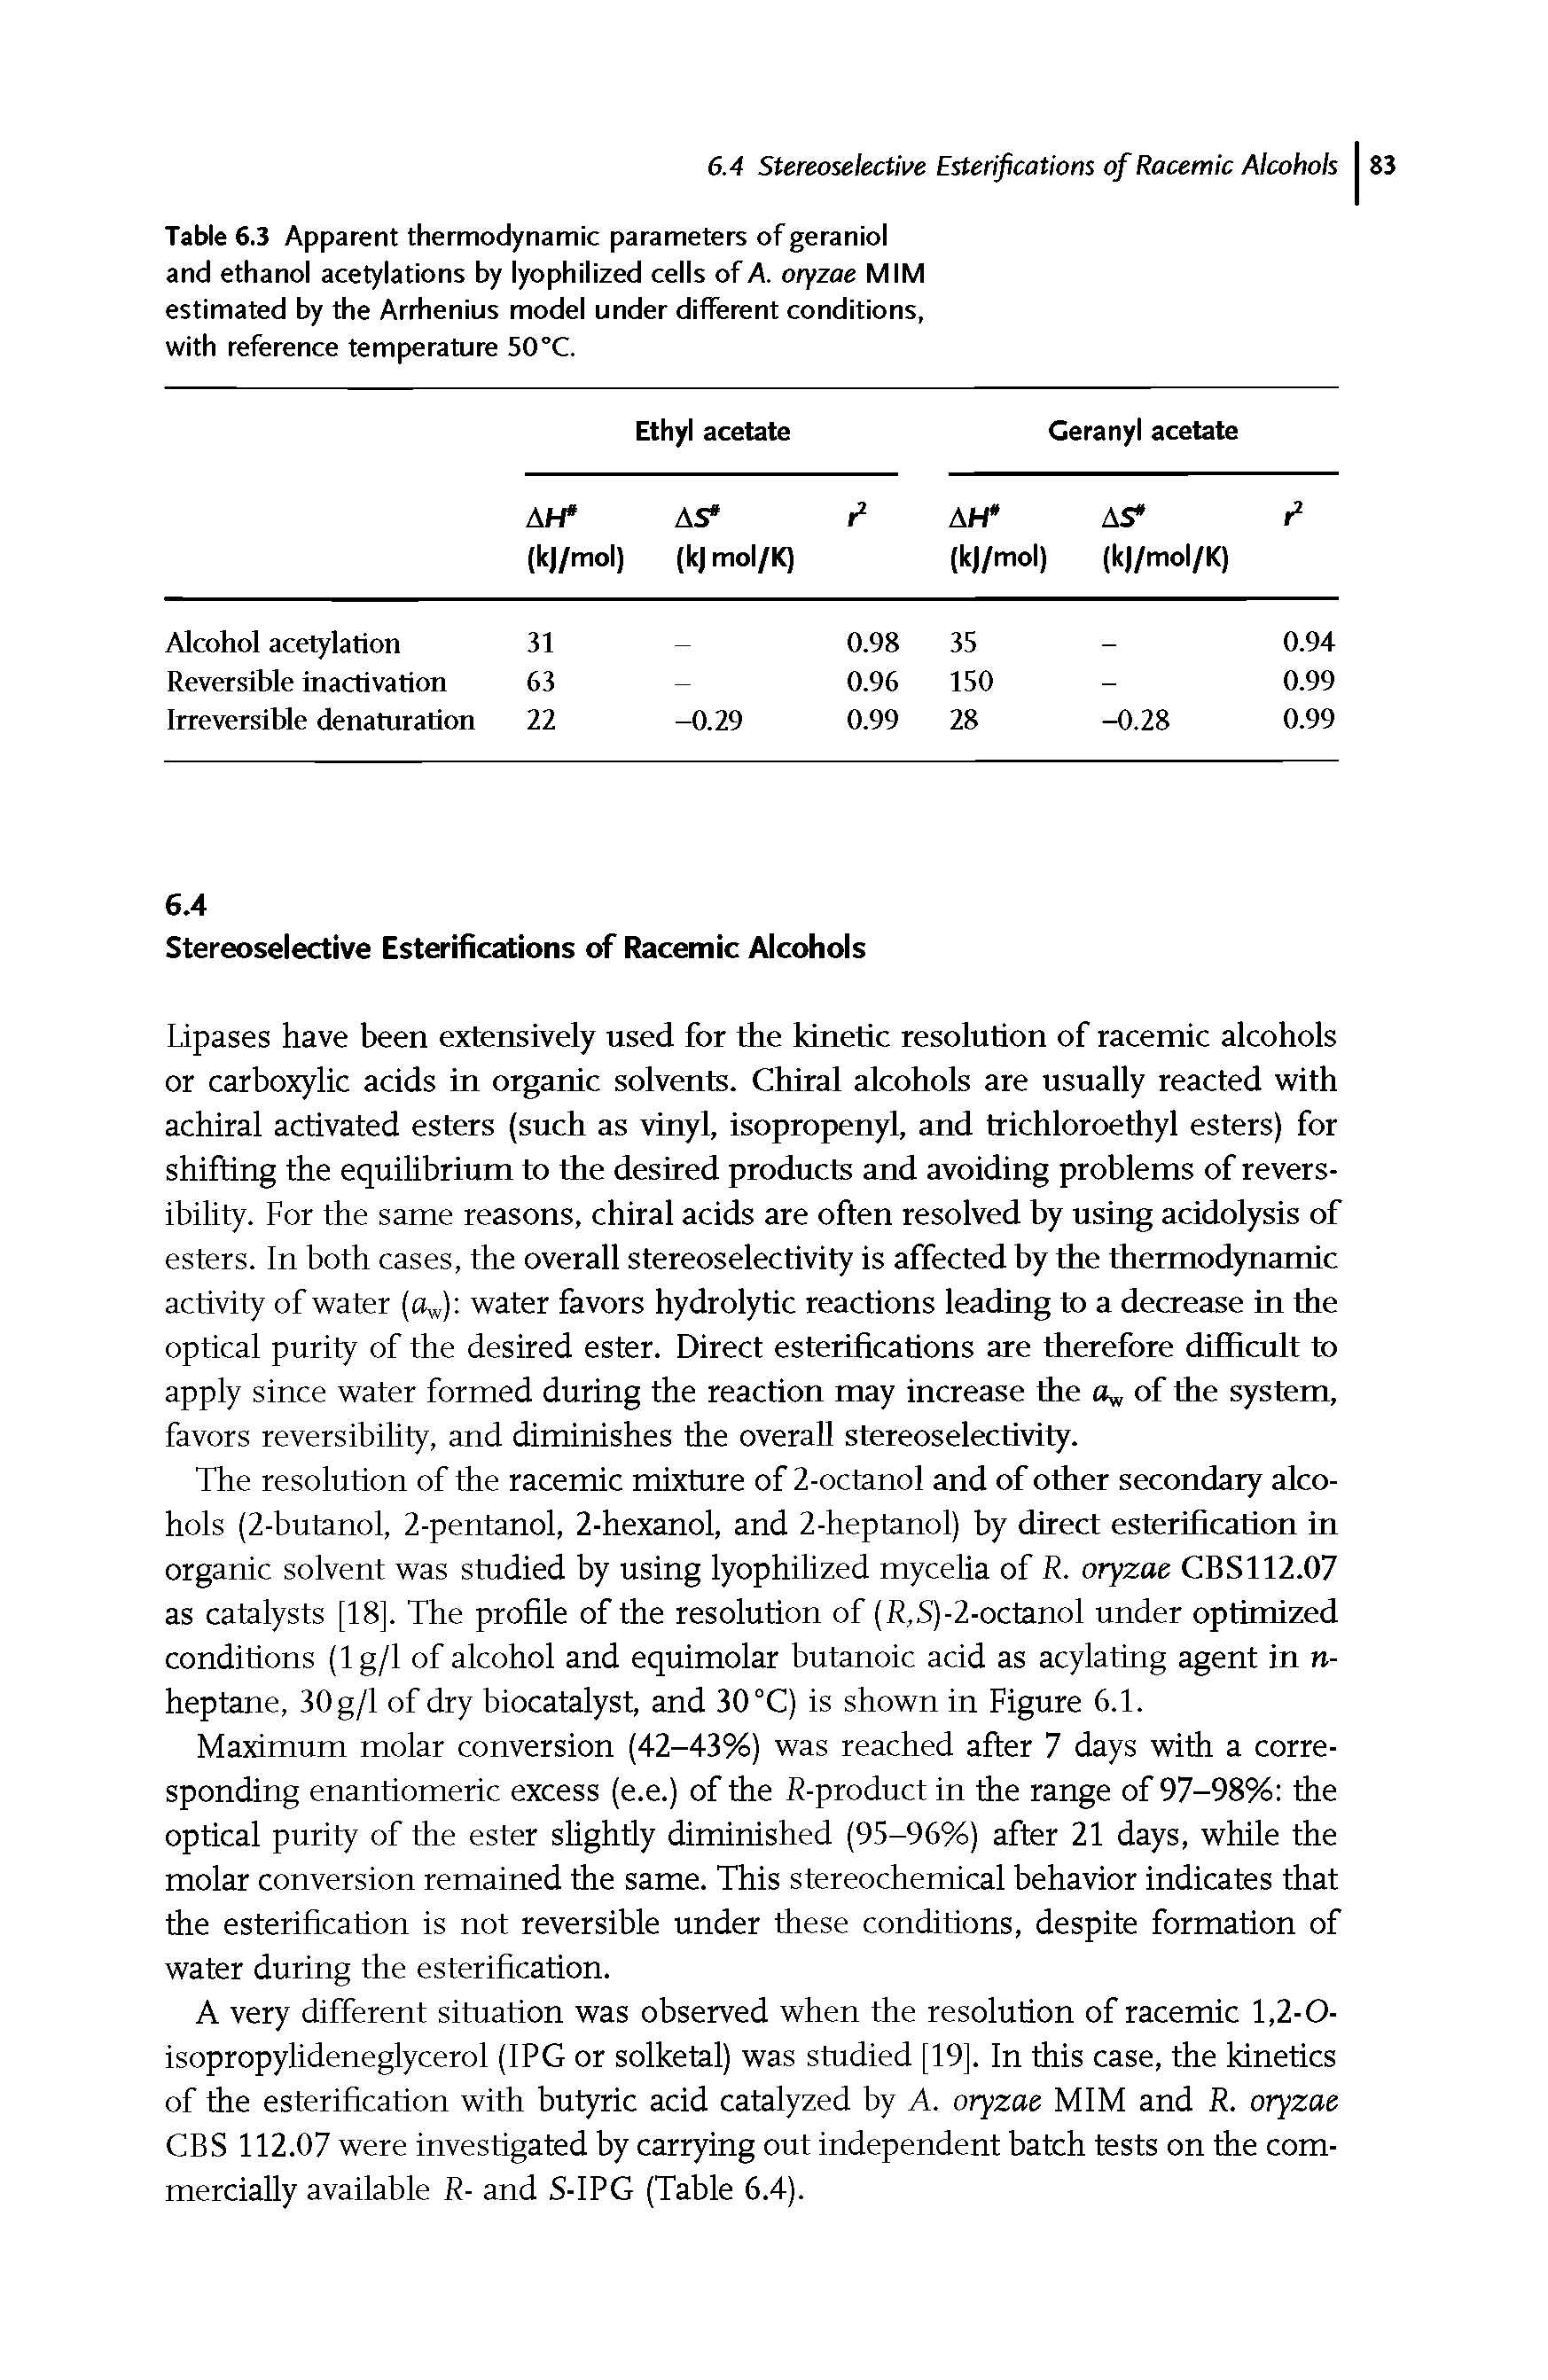 Table 6.3 Apparent thermodynamic parameters of geraniol and ethanol acetylations by lyophilized cells of A. oryzae MIM estimated by the Arrhenius model under different conditions, with reference temperature 50°C.